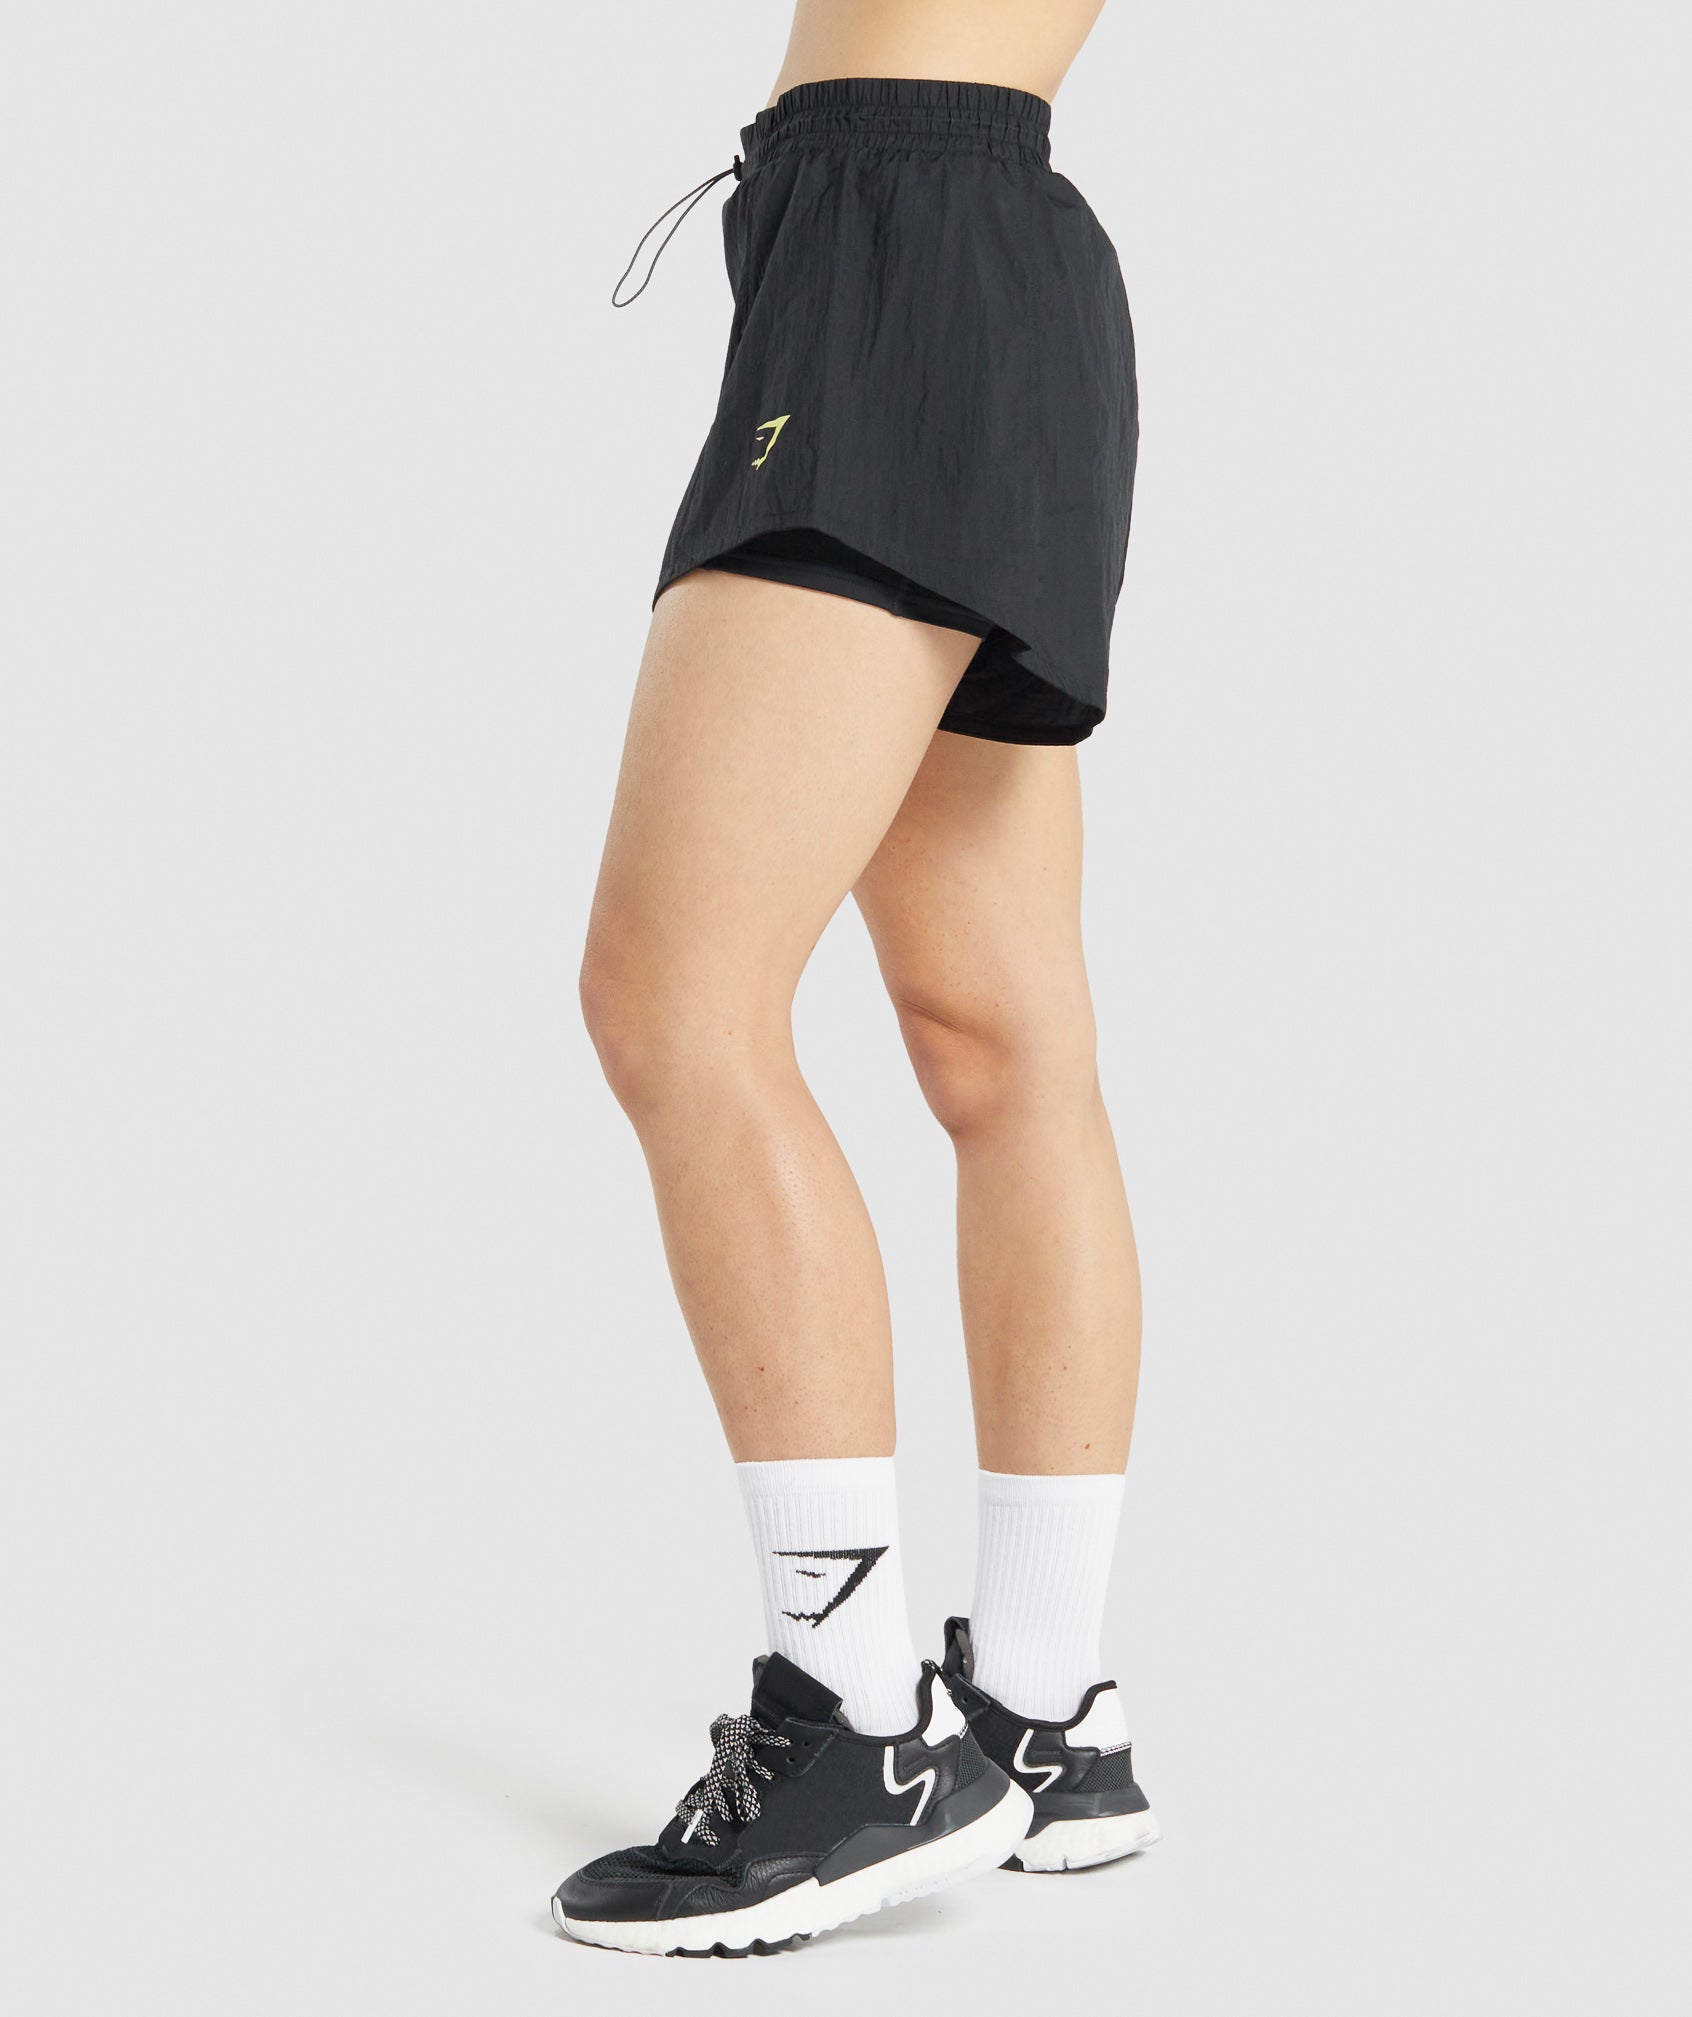 Pulse 2 in 1 Shorts in Black - view 4